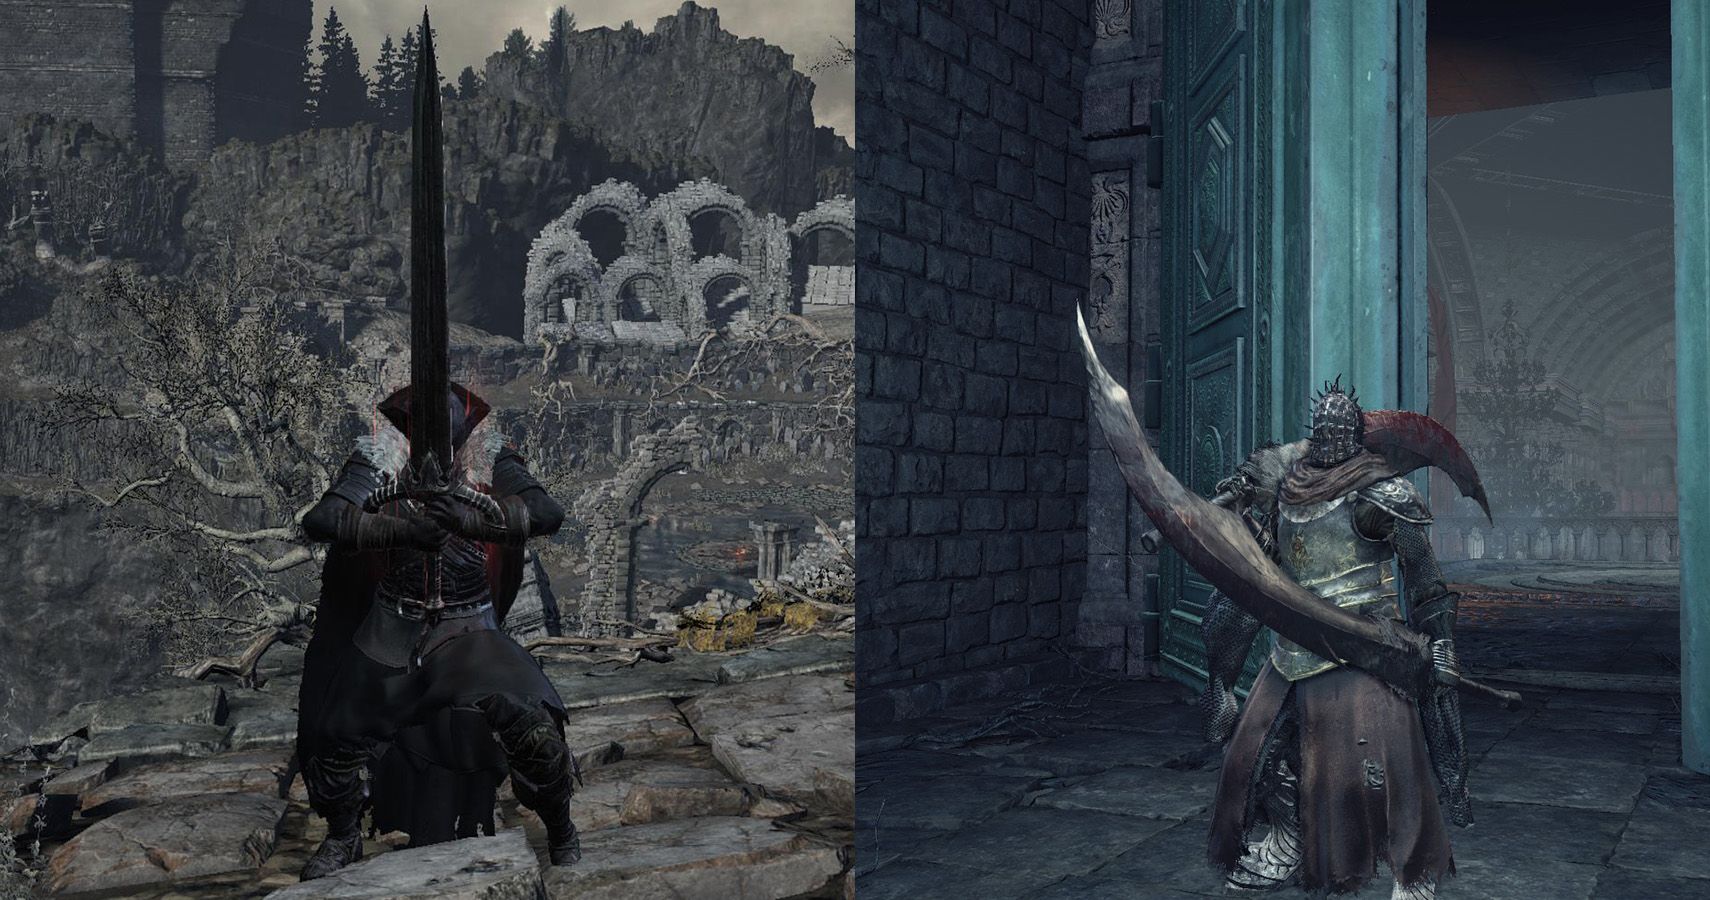 Dark Souls 3 10 Weapons That Make The Game Too Easy How To Obtain Them